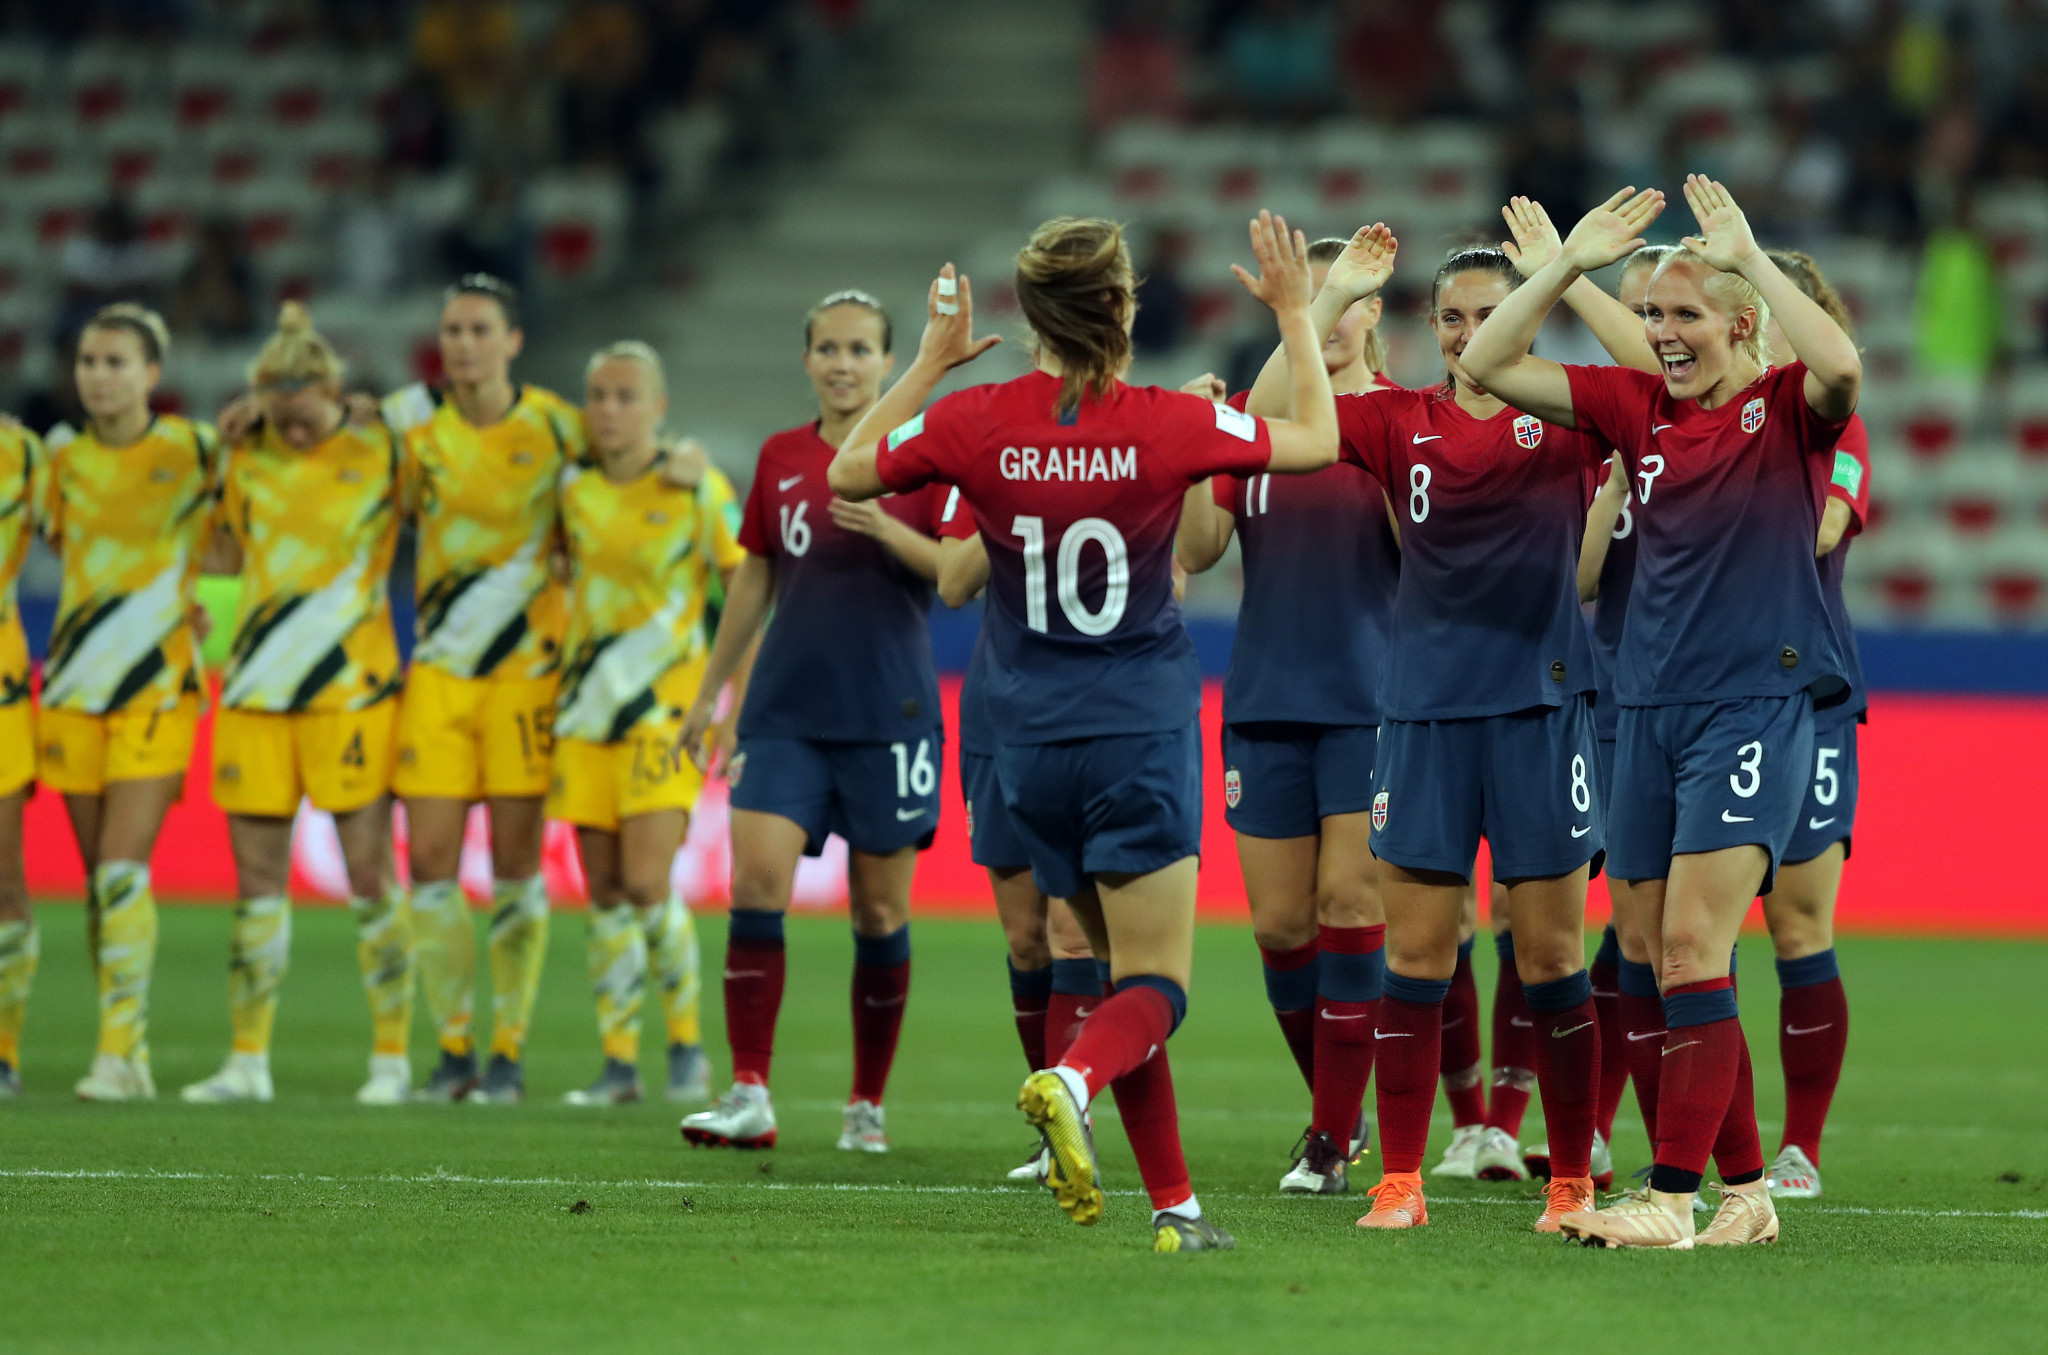 Norway beat Australia on penalties at FIFA Women's World Cup after Germany ease past Nigeria